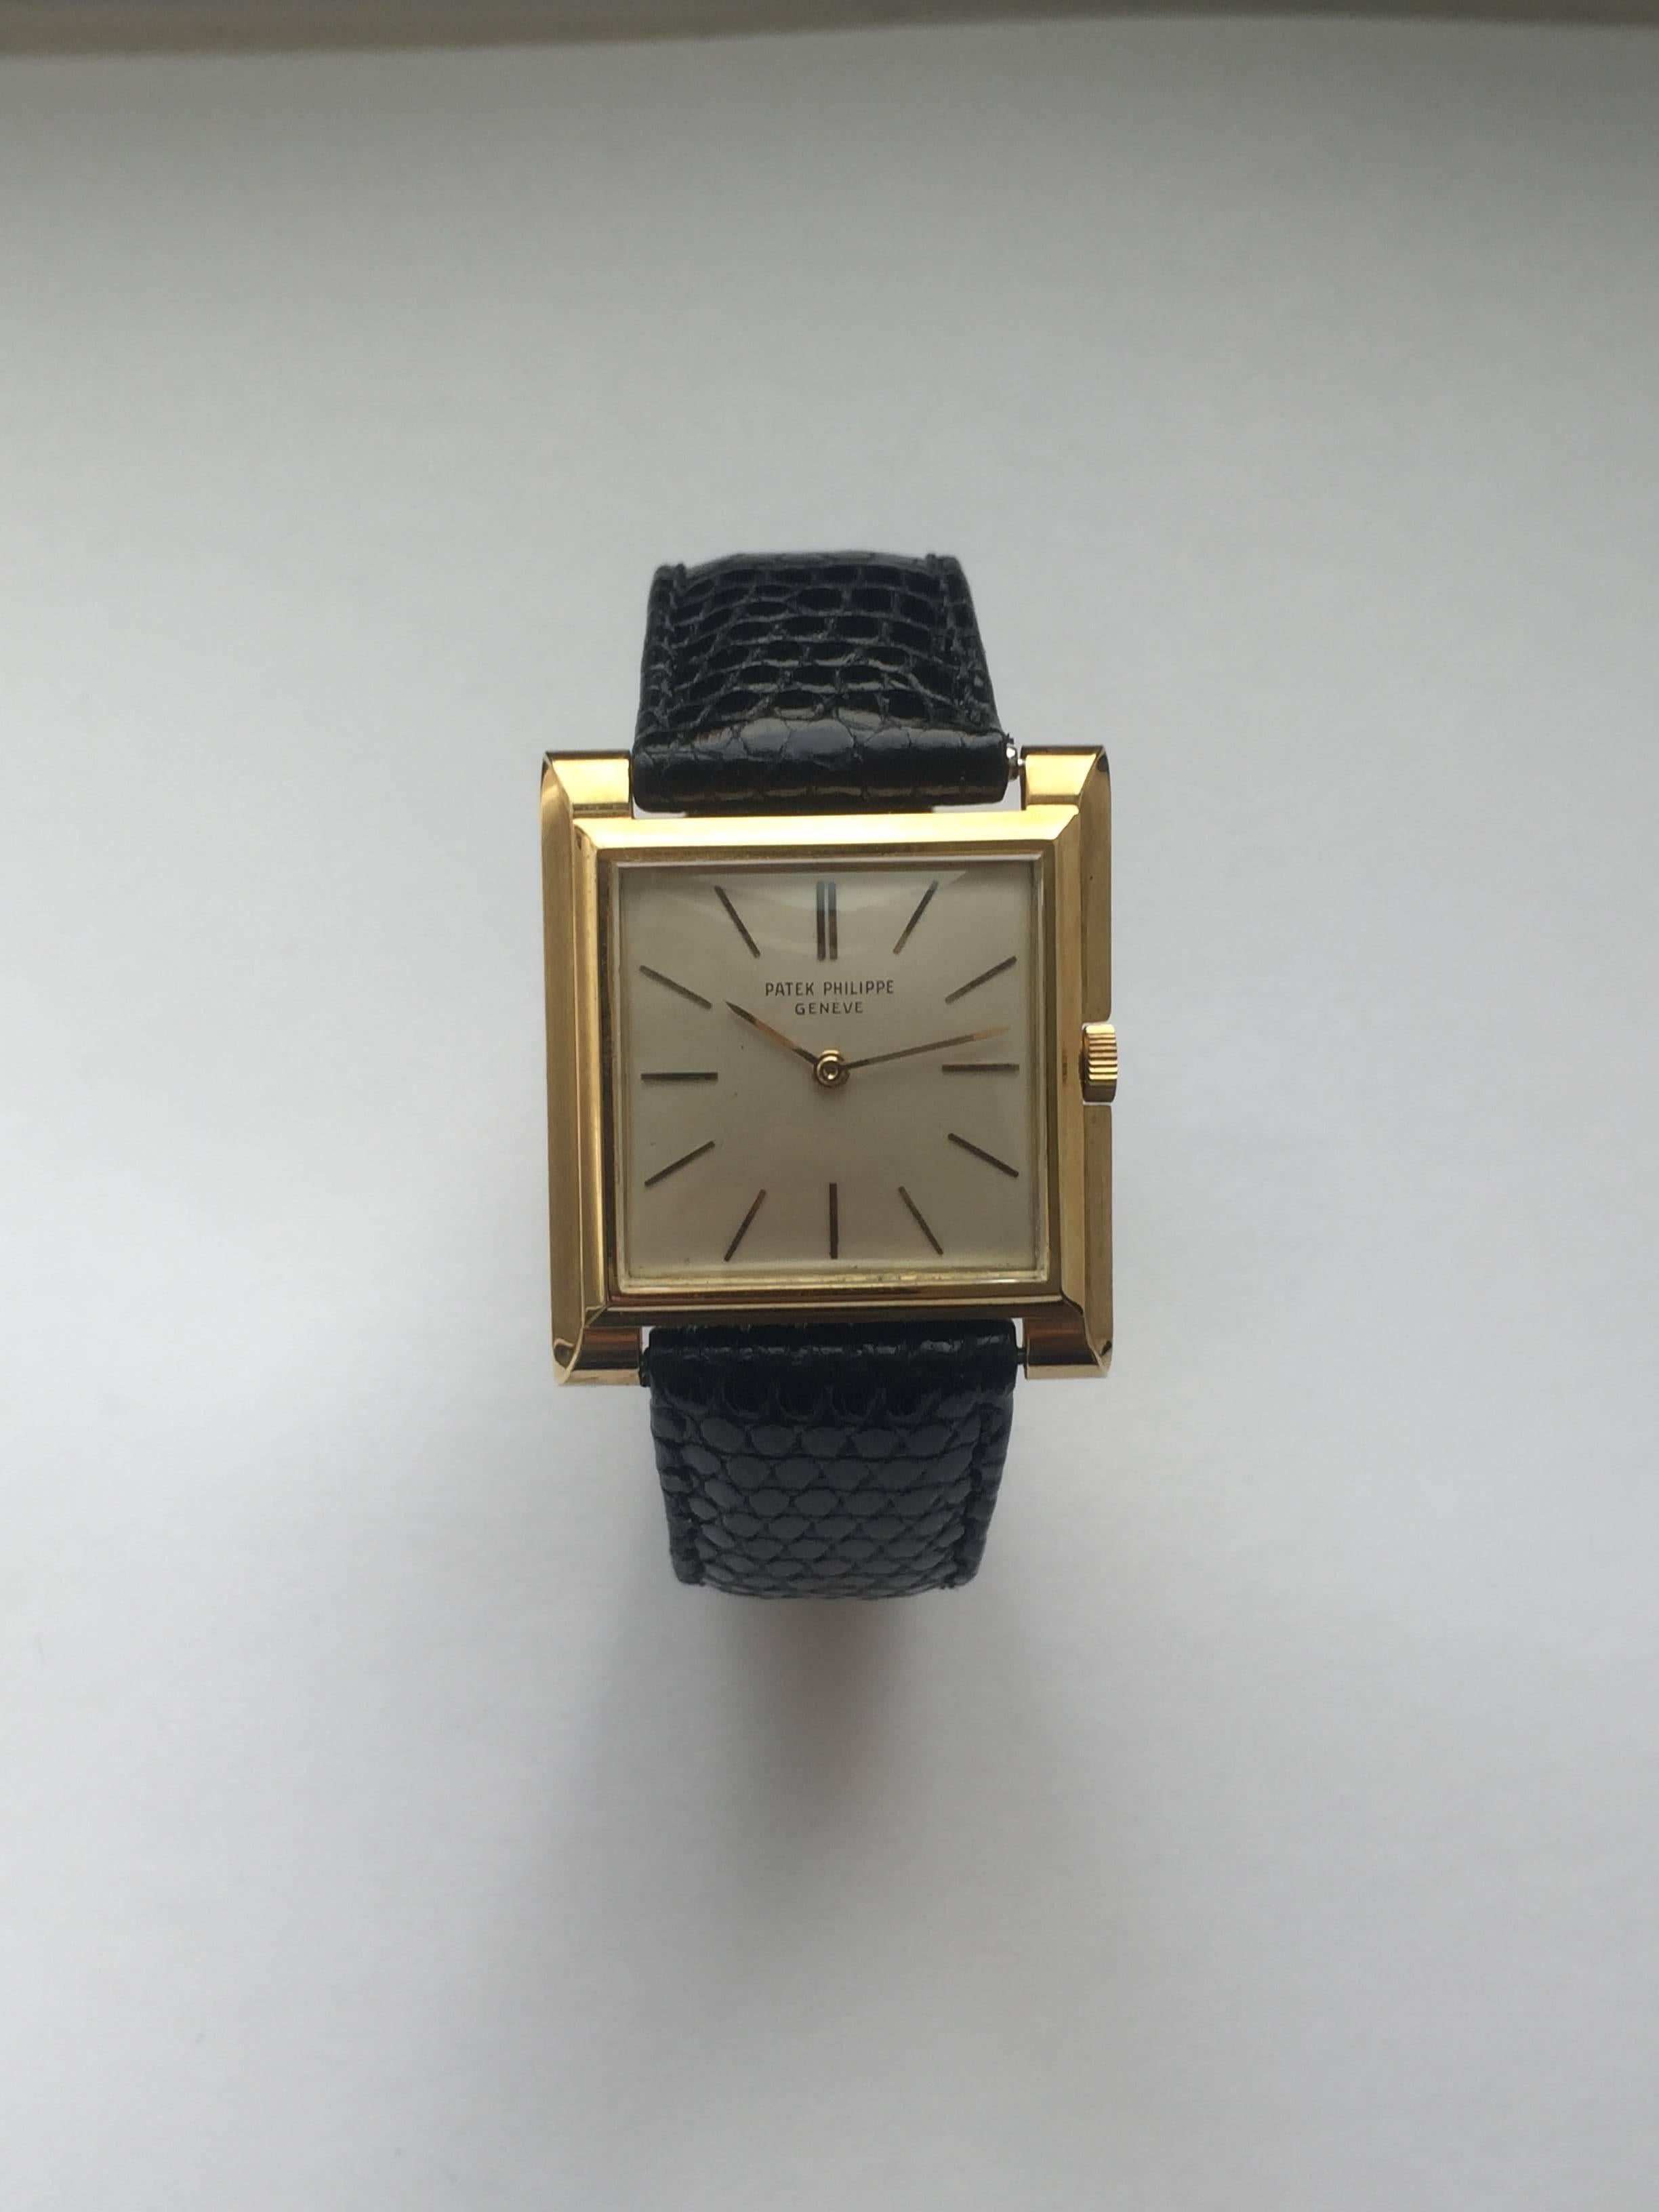 Patek Philippe 18K Yellow Gold Square Vintage Manual Wind Watch
Factory Original Silver Toned Dial with Applied Gold Colored Hour Markers
18K Yellow Case
32mm x 28mm
Patek Philippe Manual Wind Movement 
Acrylic Crystal
Circa Late 1950's
Engraved